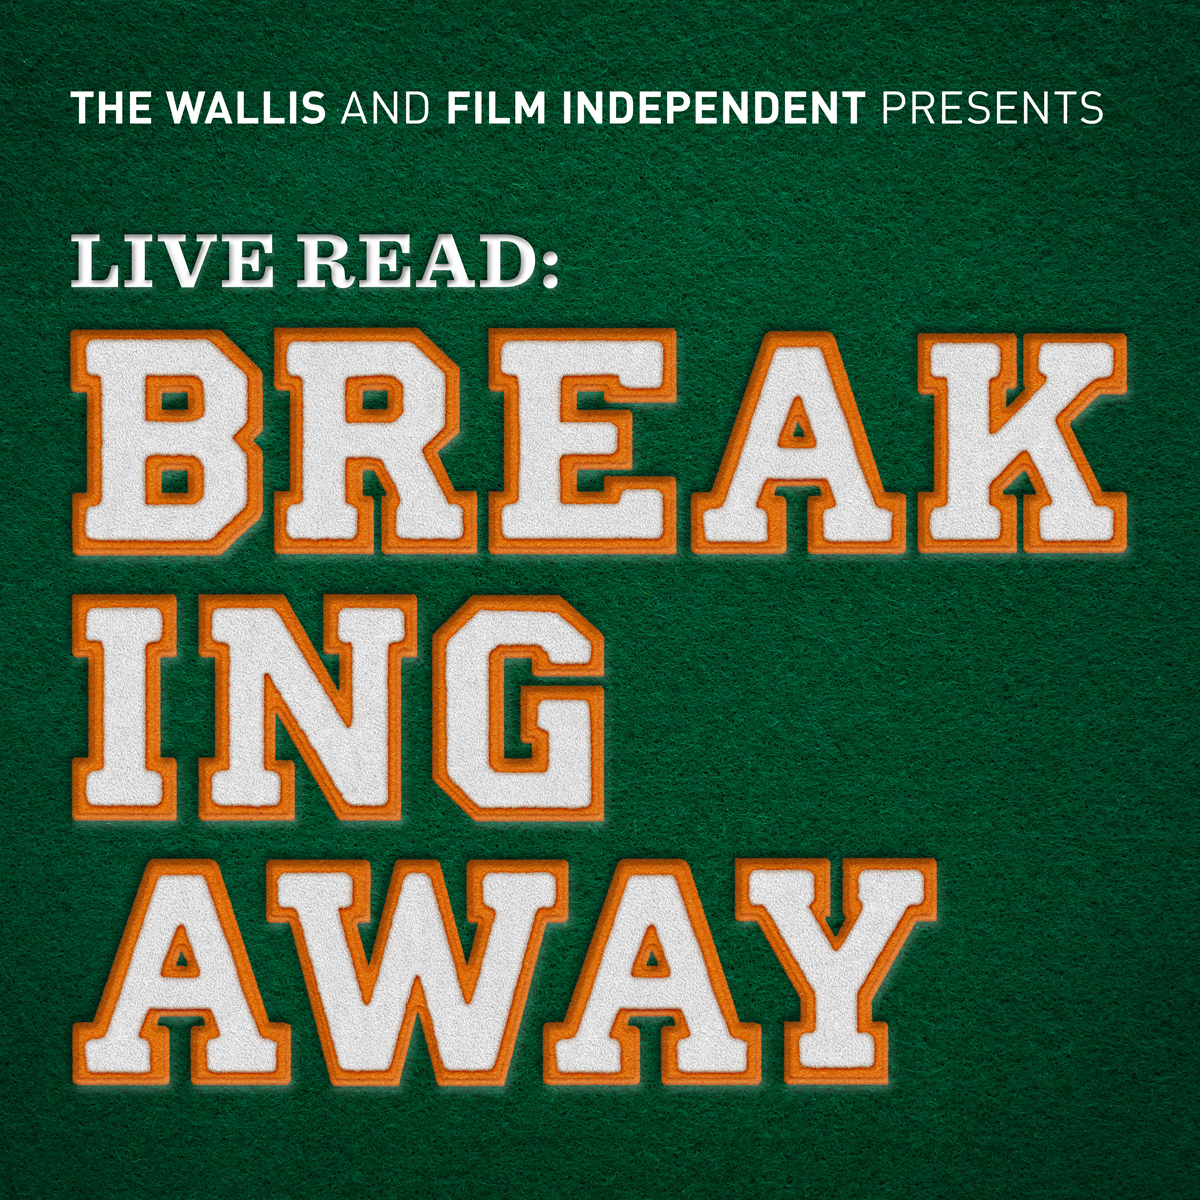 A Live Read of BREAKING AWAY